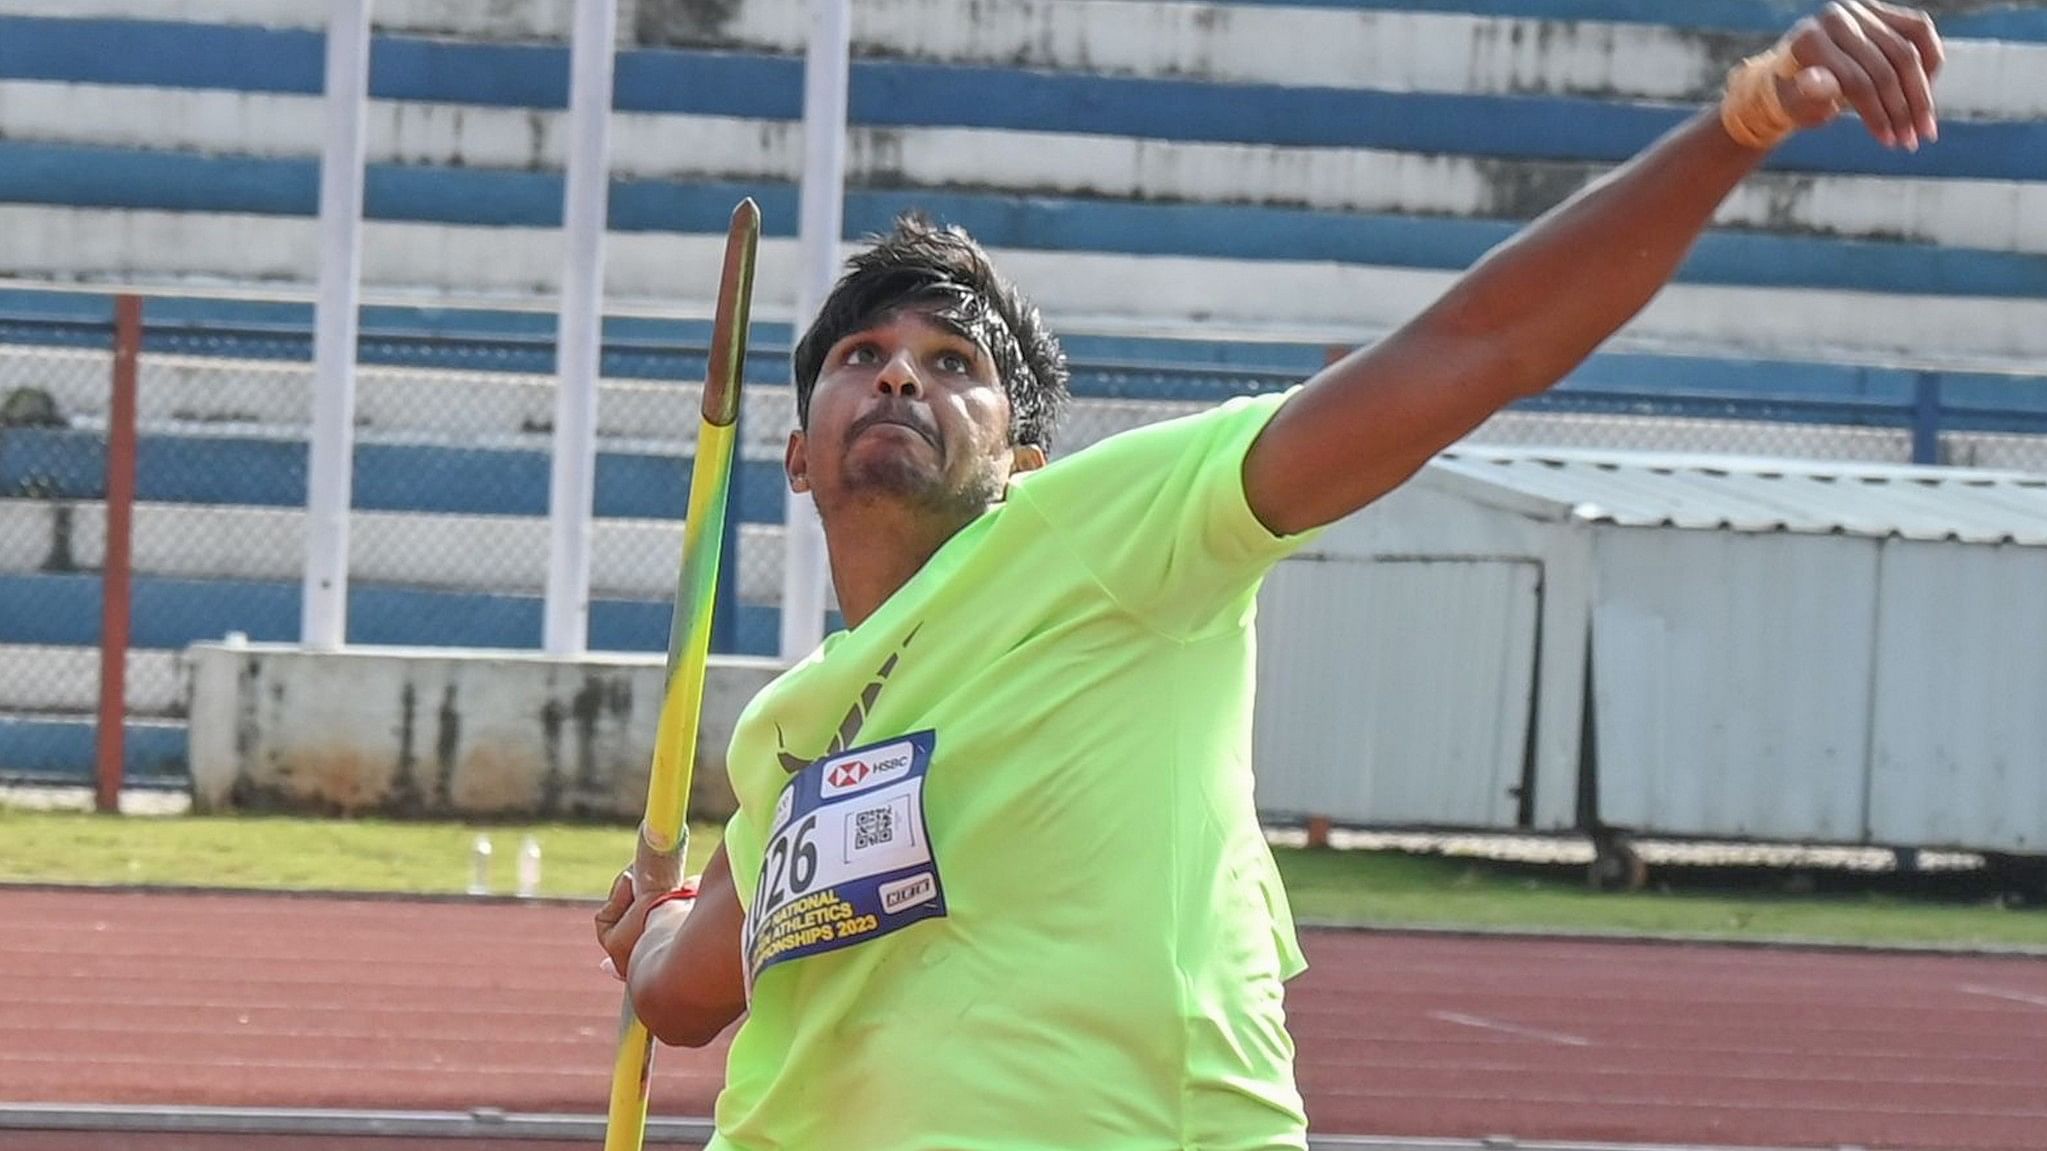 <div class="paragraphs"><p>Services’ DP Manu competes in the men’s javelin throw final during the 62nd National Open Athletics Championship at the Sree Kanteerava stadium on Sunday.&nbsp;</p></div>